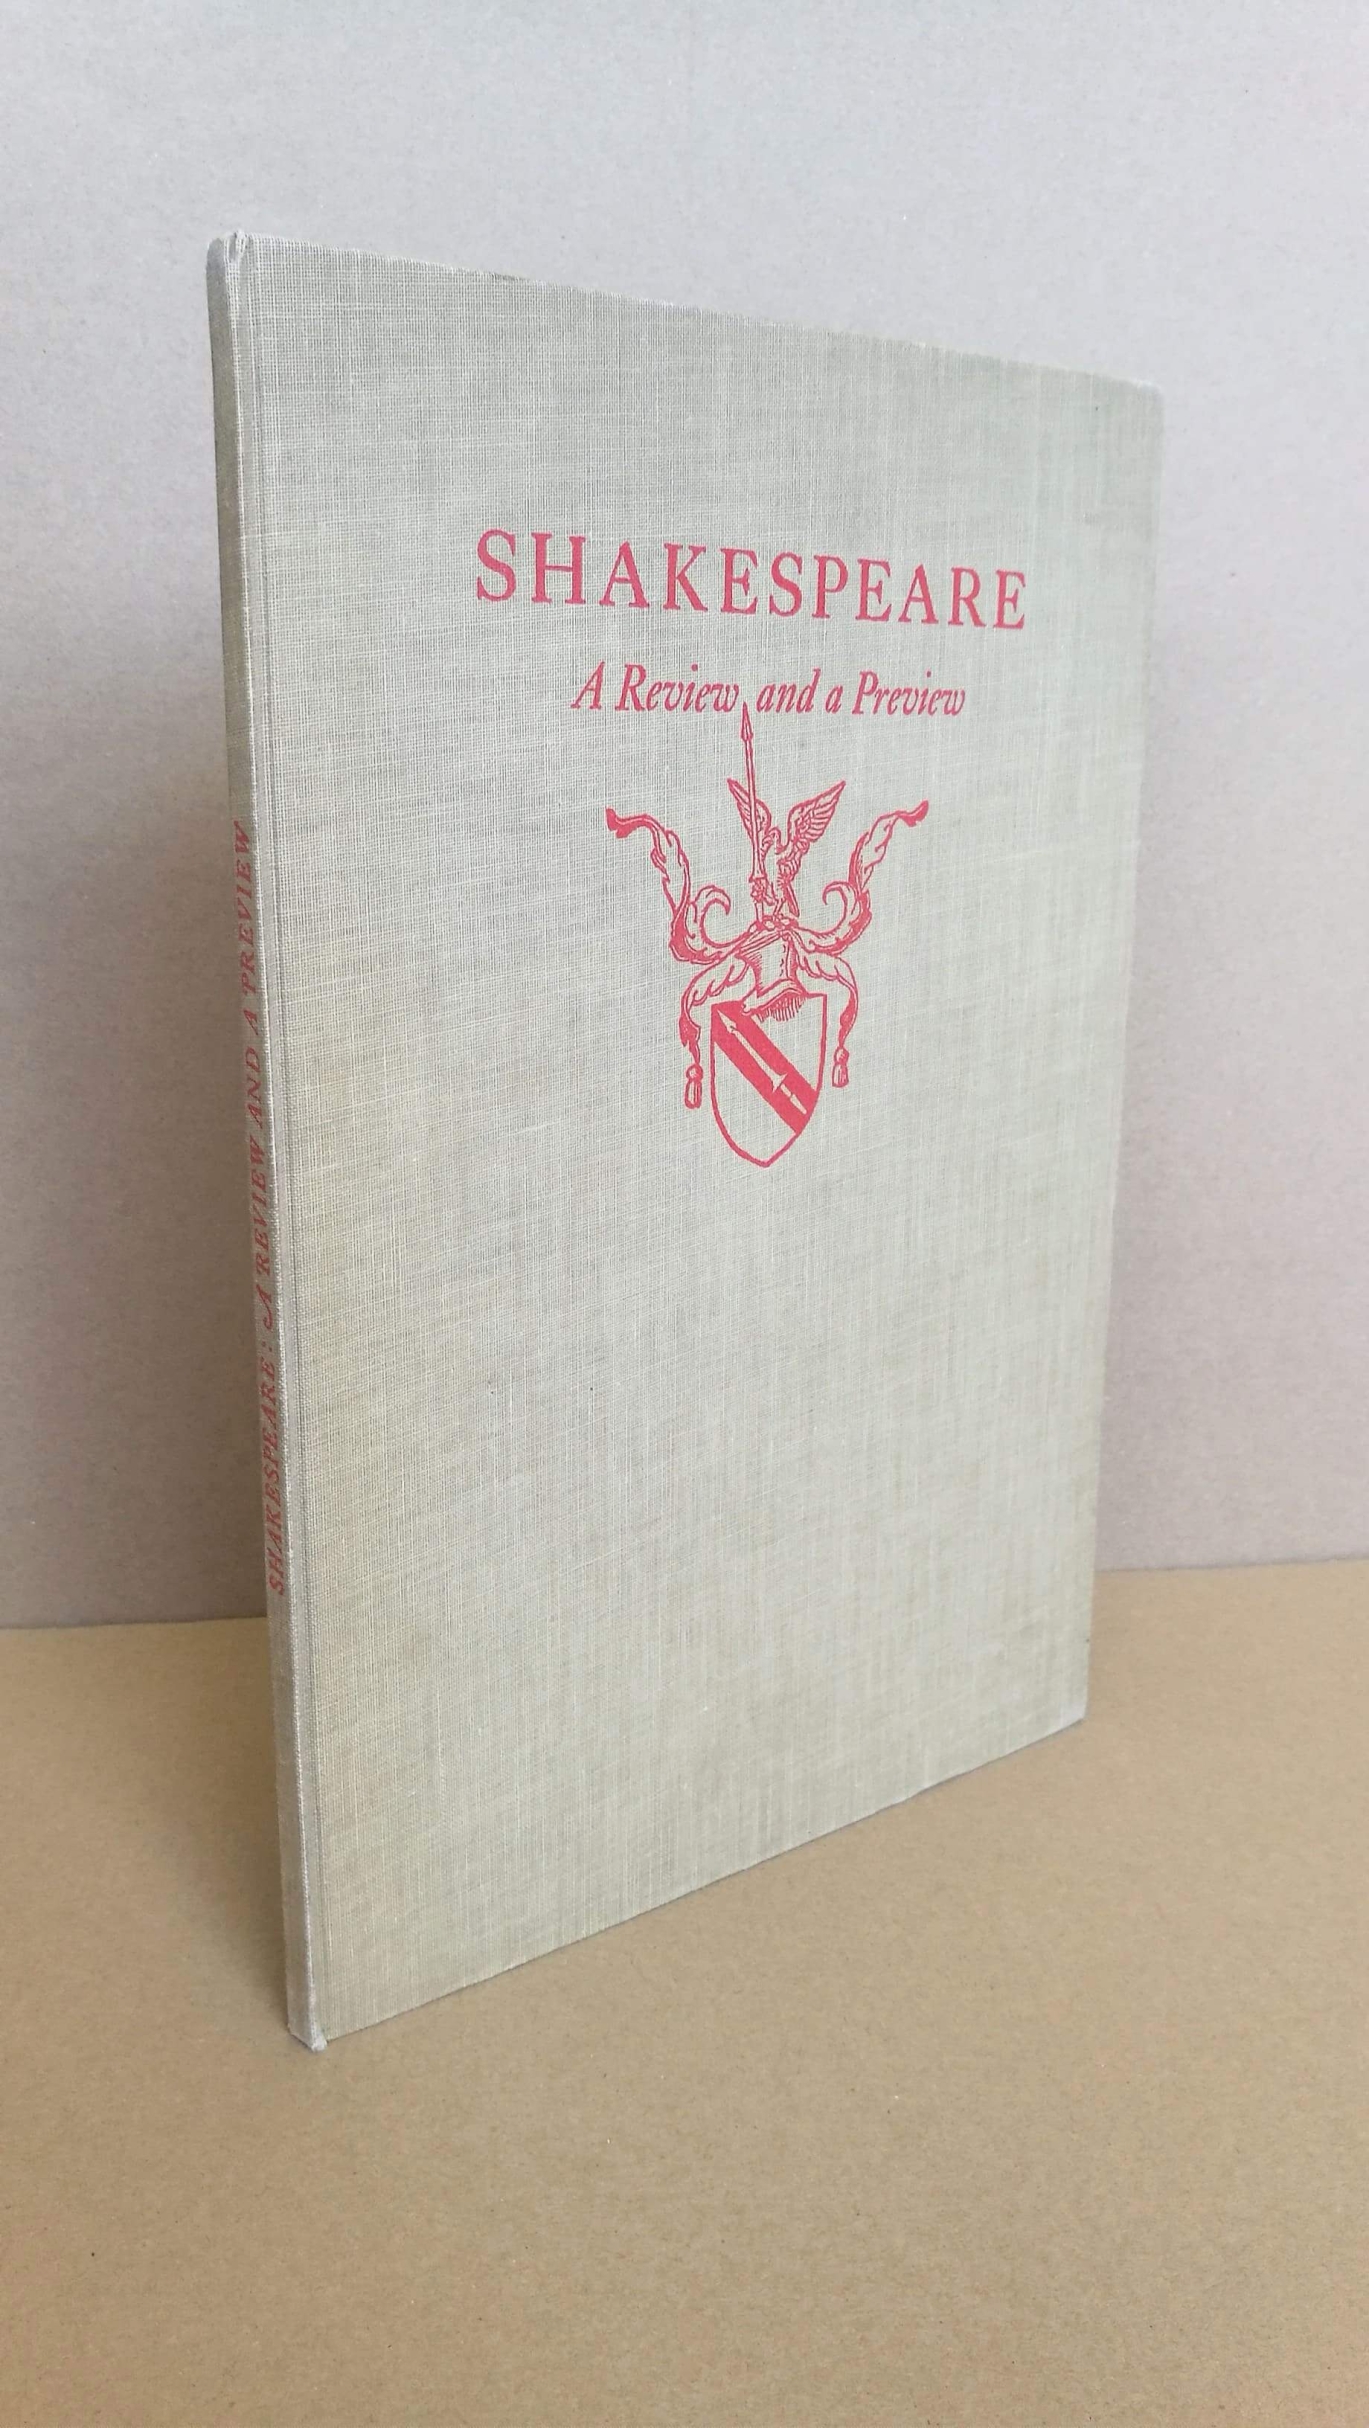 Shakespear, William: A Review and a Preview.